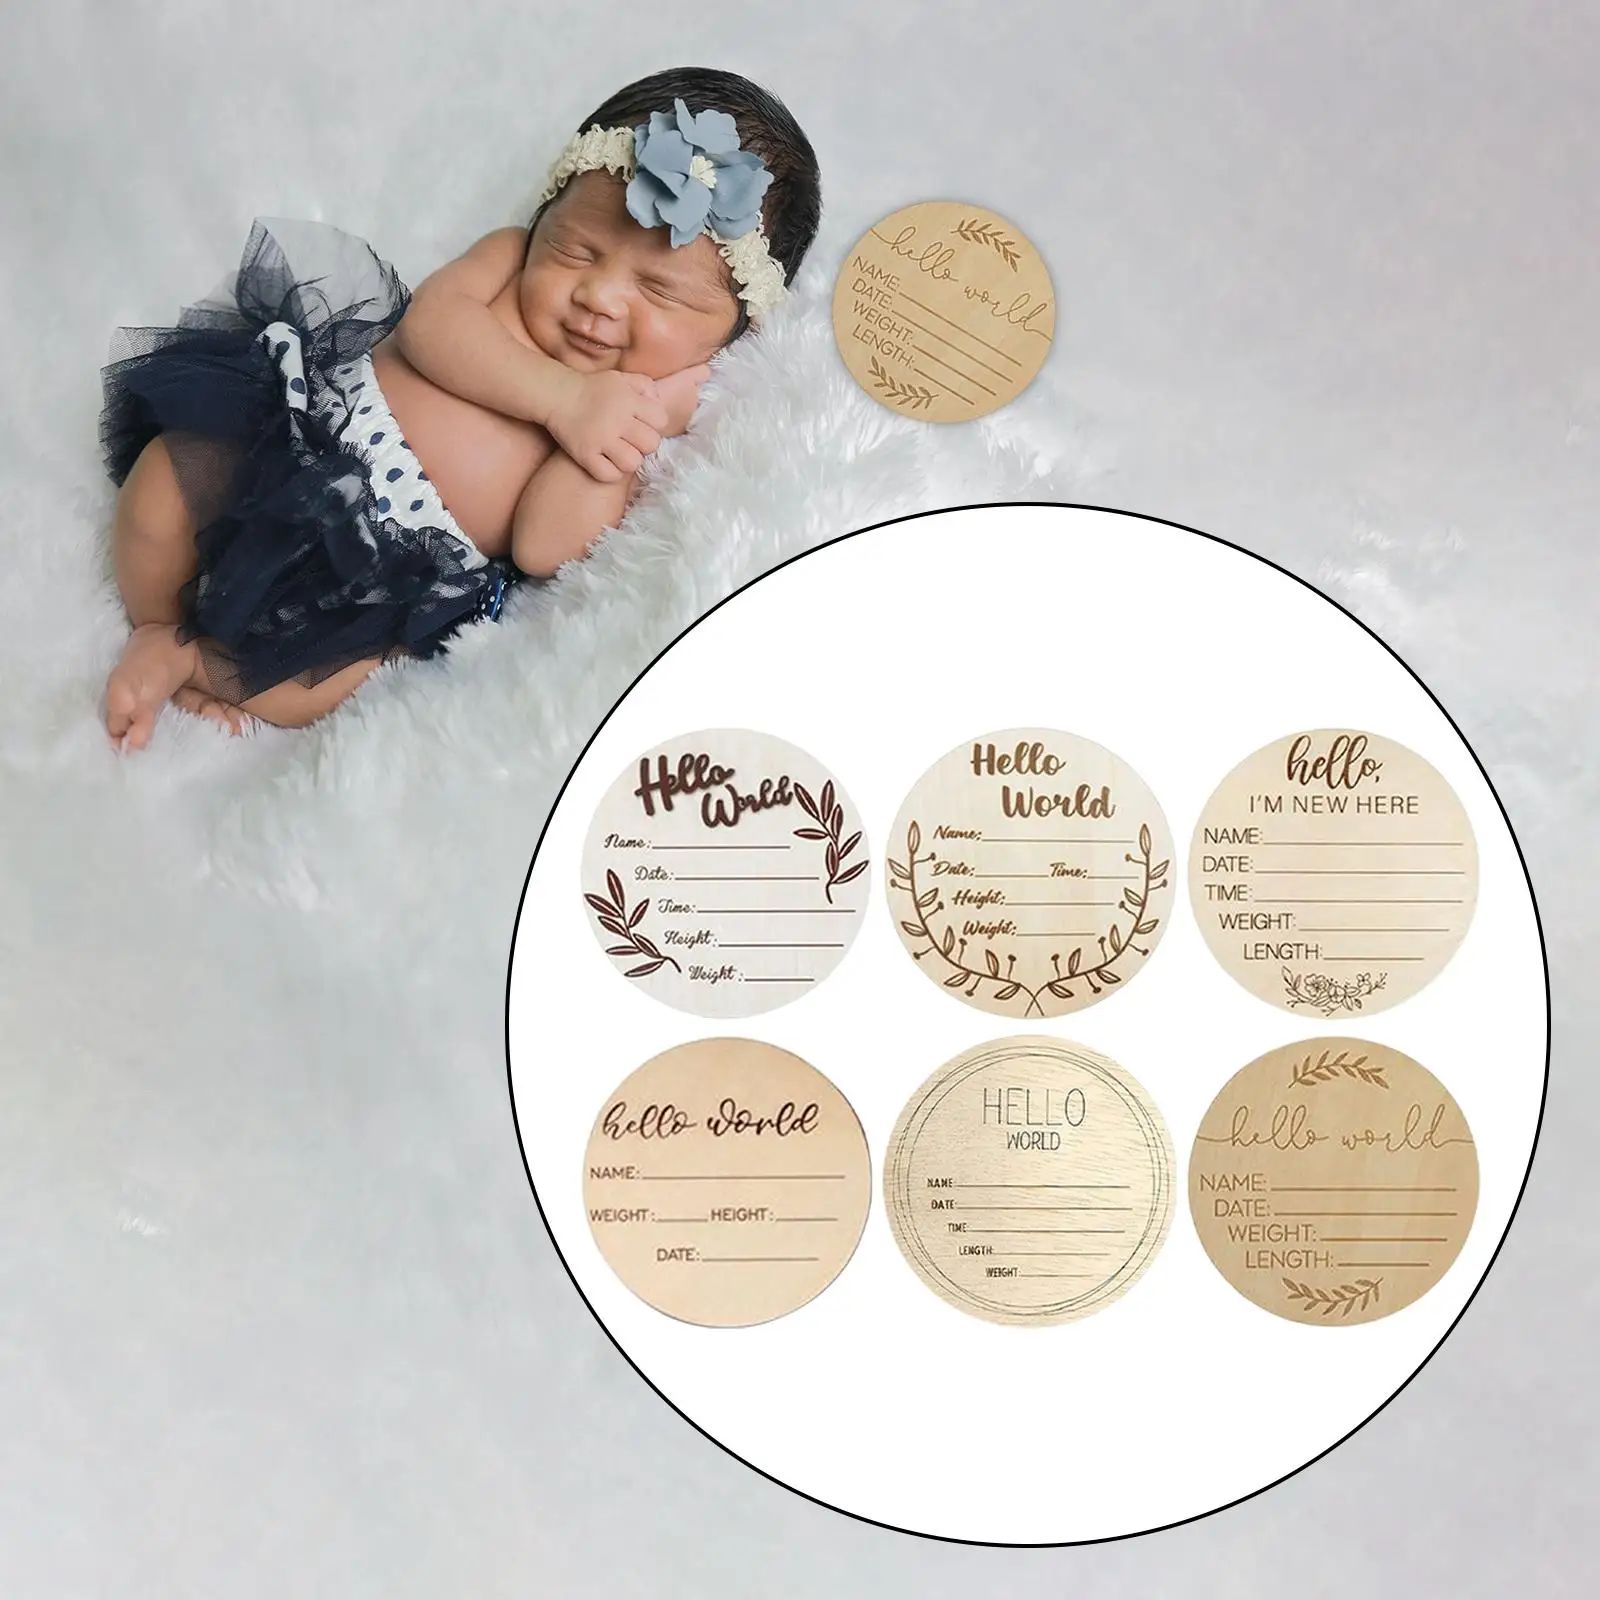 18 Pieces Baby Milestone Discs Double Sided for Baby Registry Shower Gifts